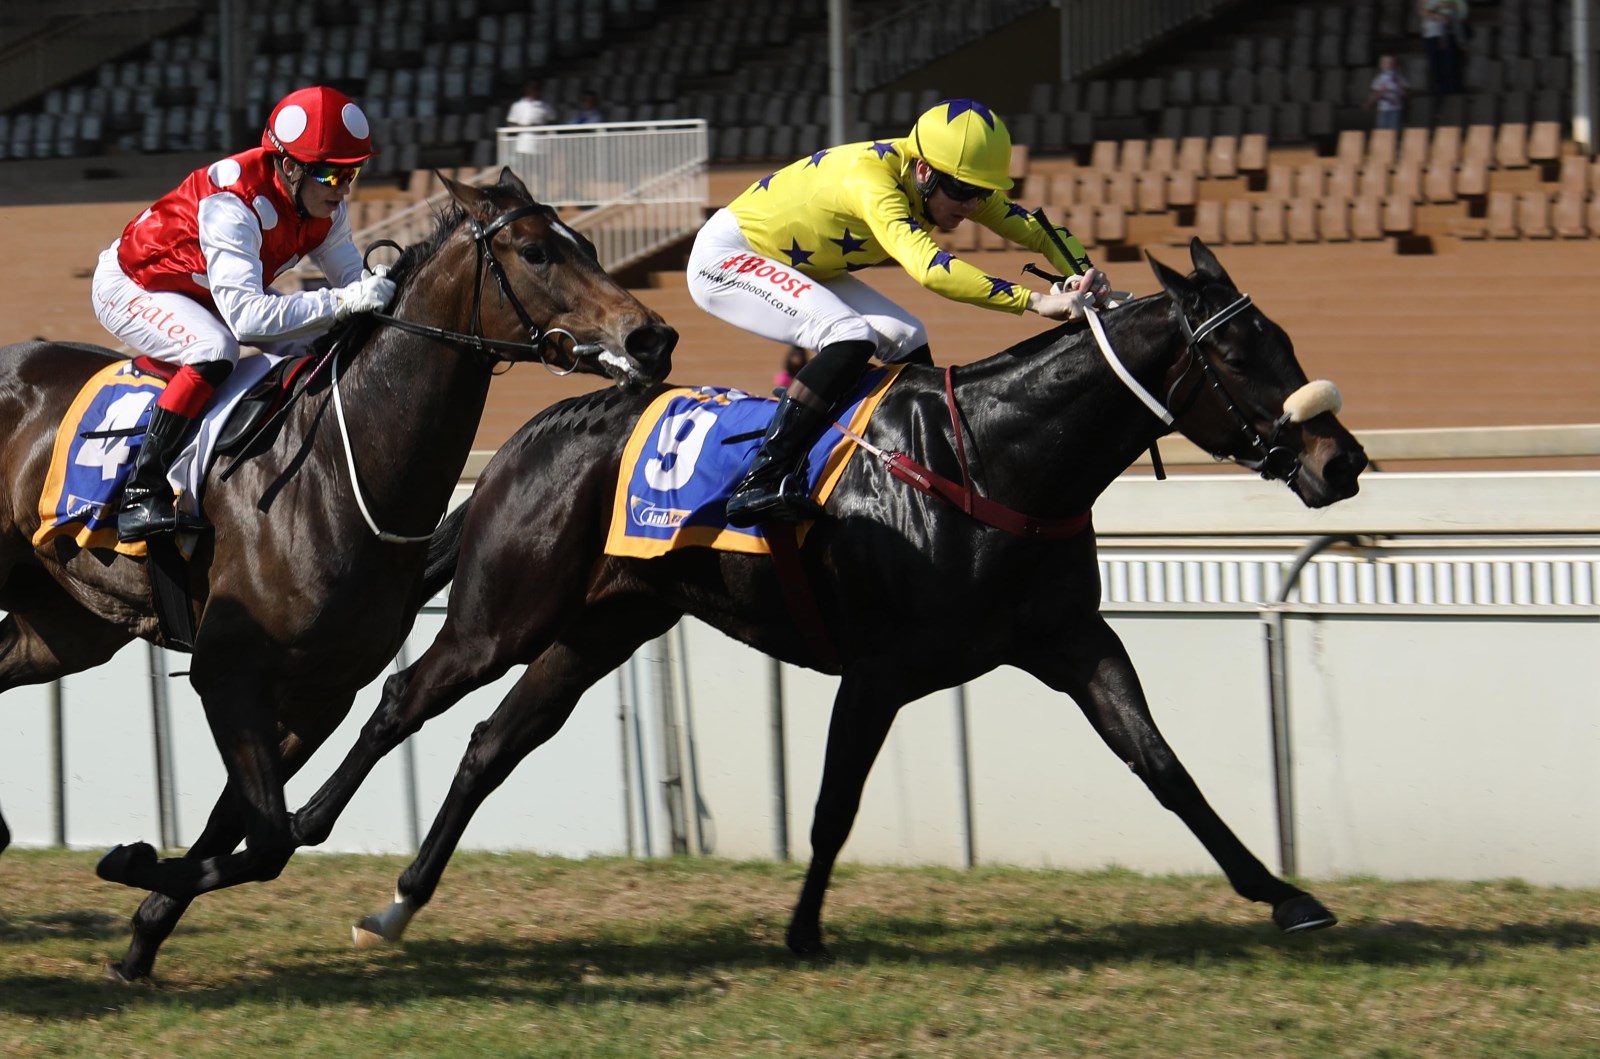 Mocha Rose winning at Scottsville in July 2018. Trained by Duncan Howells. Owned by the Hollywood Syndicate.